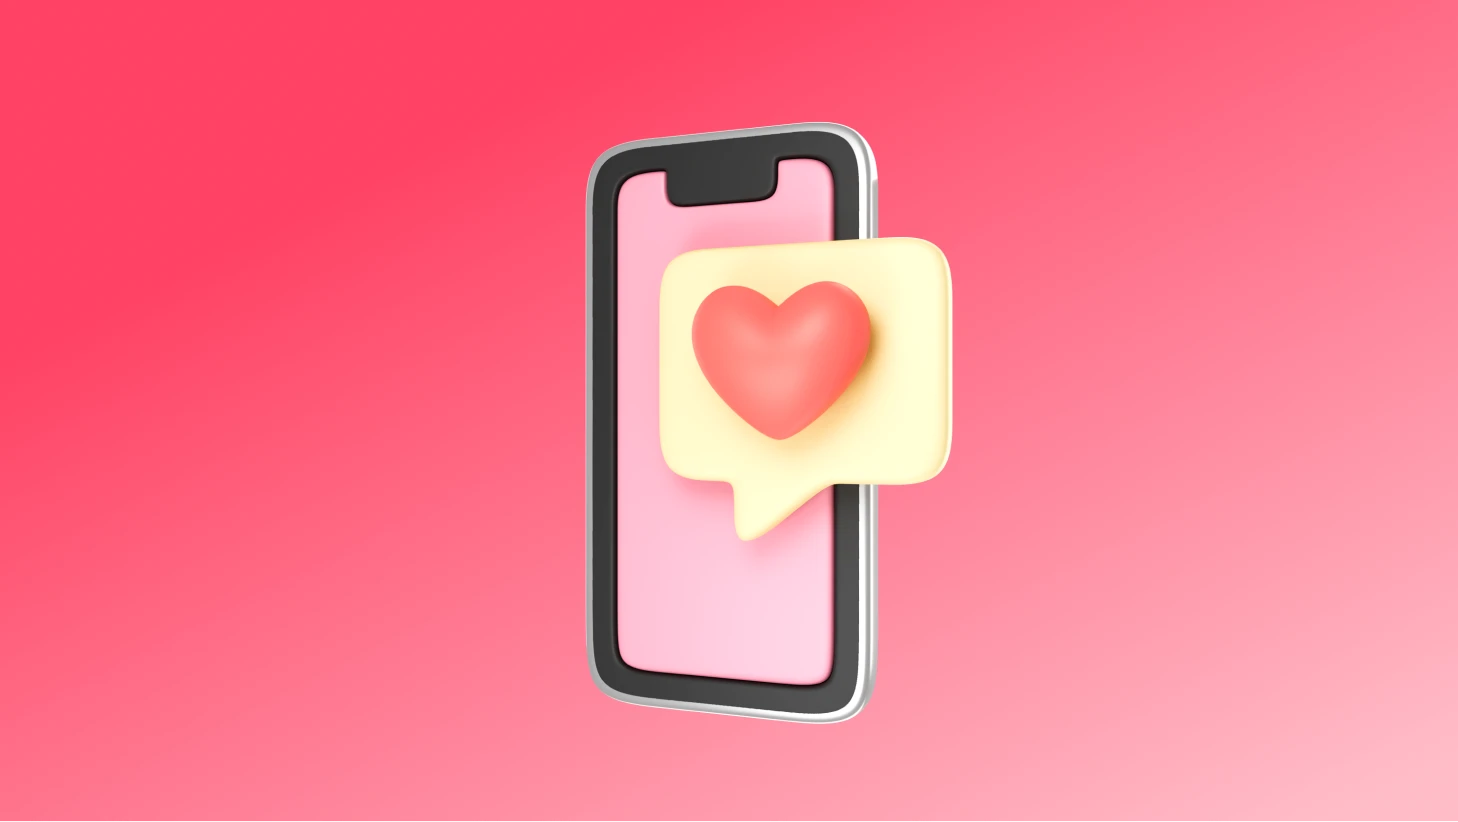 How to build a dating app for iOS & Android in a 1 day